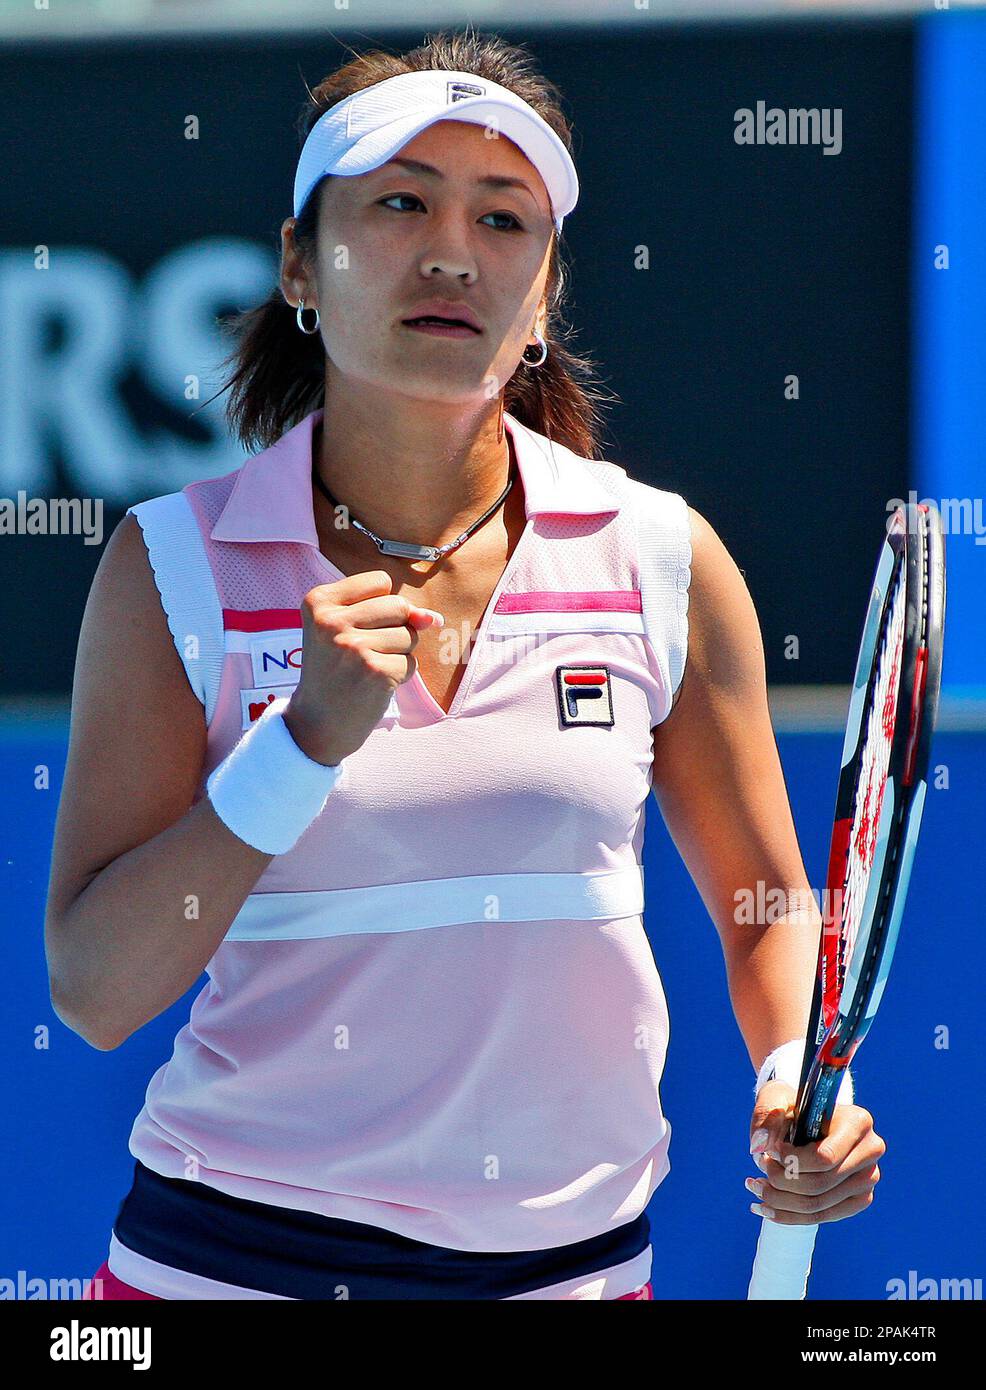 Japan's Akiko Morigami reacts as she plays Michaela Krajicek of the Netherlands during a first round match against at the Australian Open tennis championships in Melbourne, Australia, Tuesday, Jan. 15, 2008. (AP Photo/Mark Baker) Stock Photo